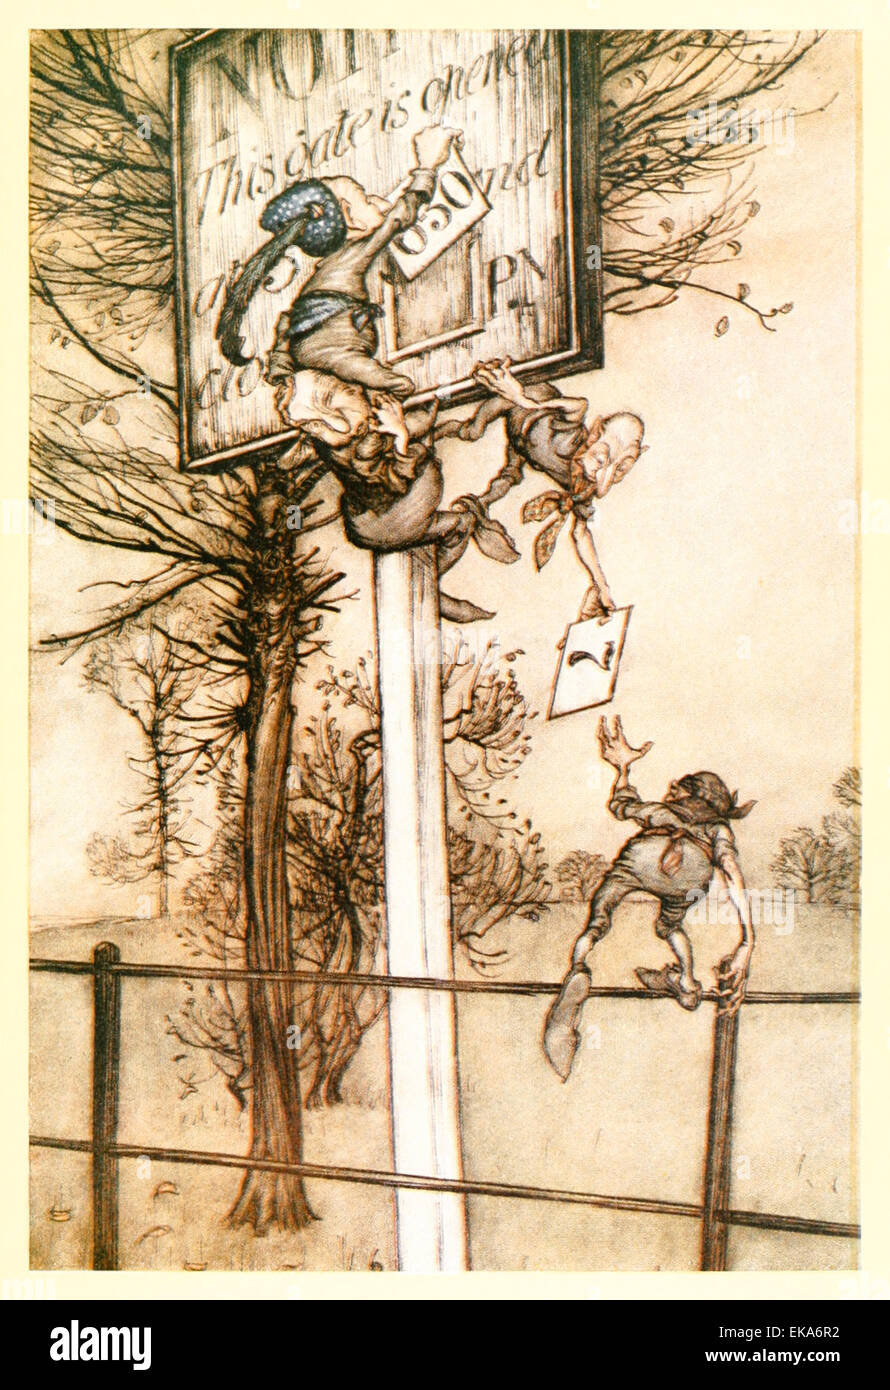 These tricky fairies sometimes change the board on a ball night - Illustration by Arthur Rackham (1867-1939) from ‘Peter Pan in Kensington Gardens' by J.M. Barrie (1860-1937). See description Stock Photo